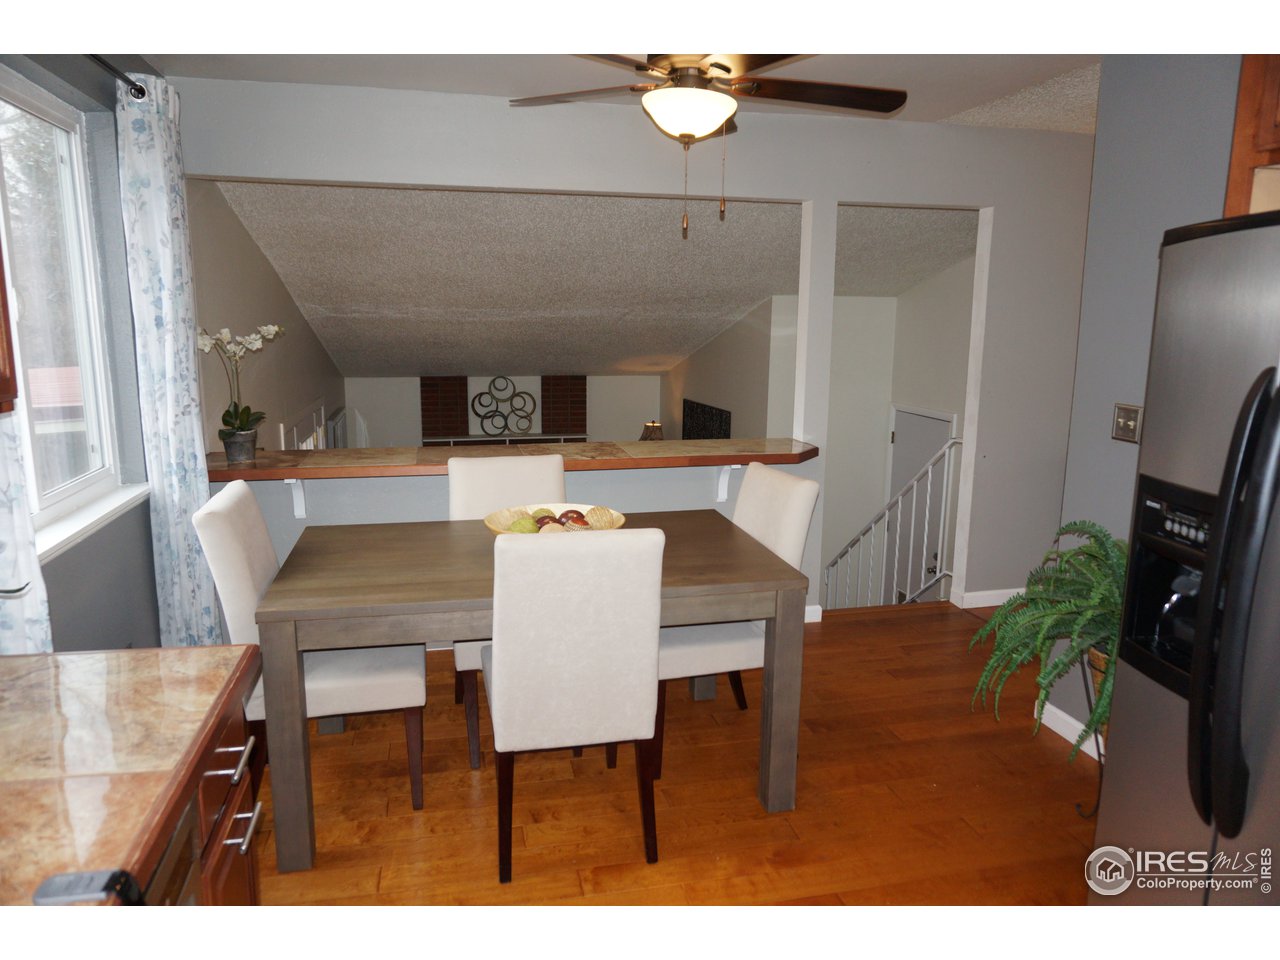 Dining Area in Kitchen